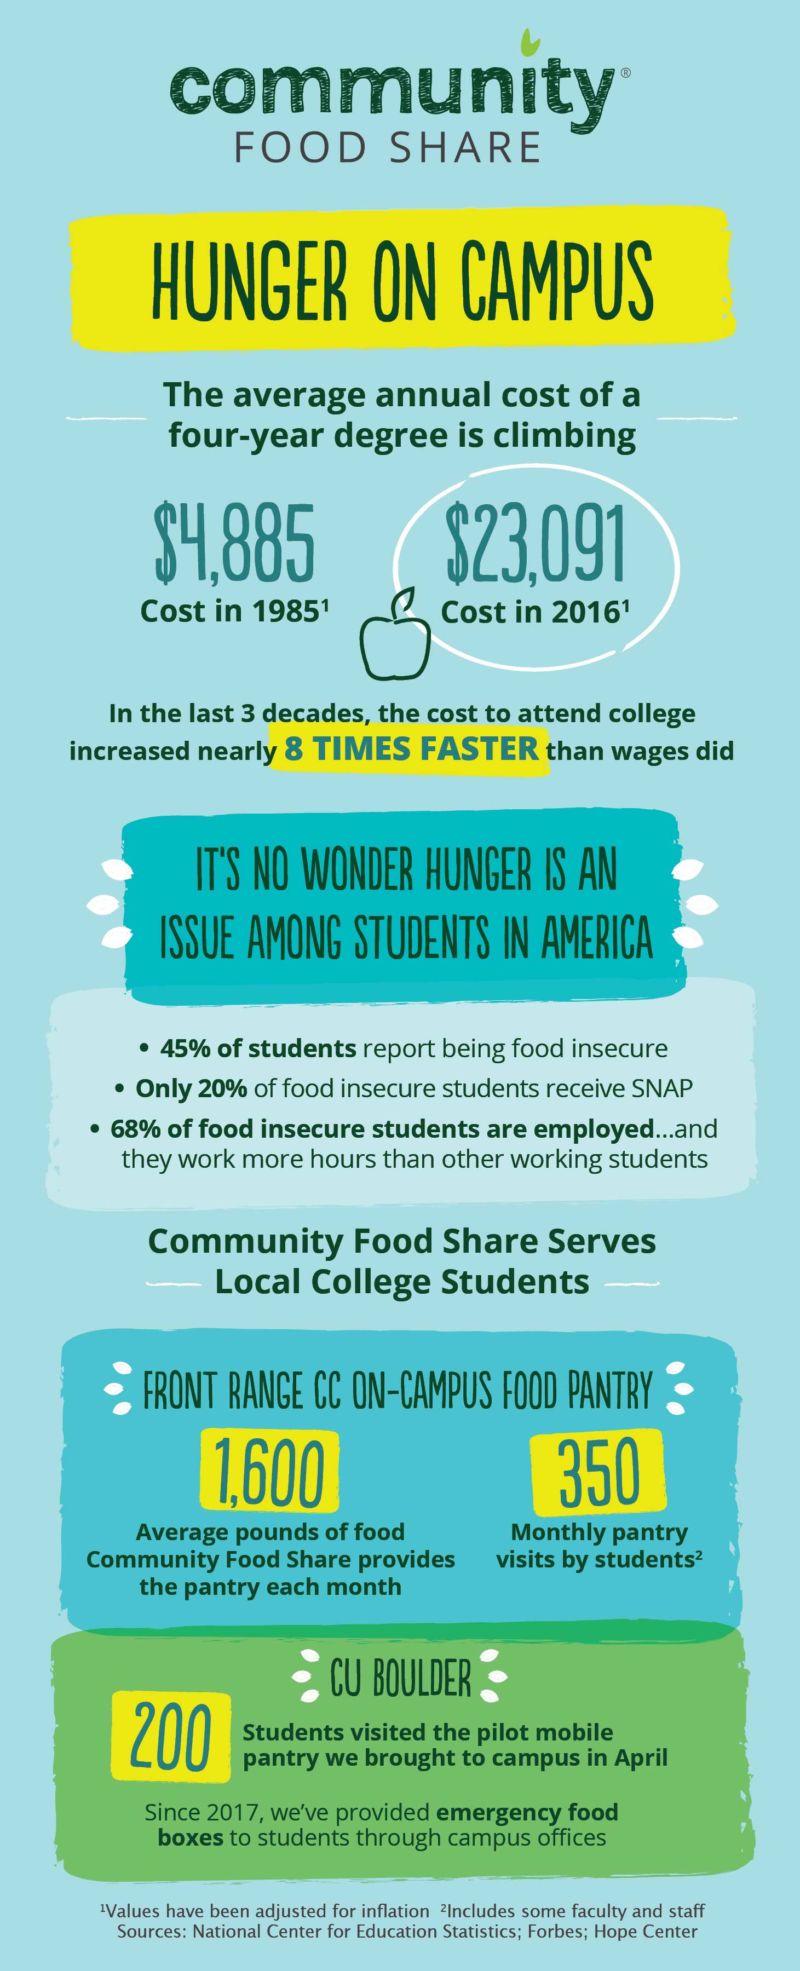 An infographic describes how hunger on college campuses has likely increased due to skyrocketing tuition costs